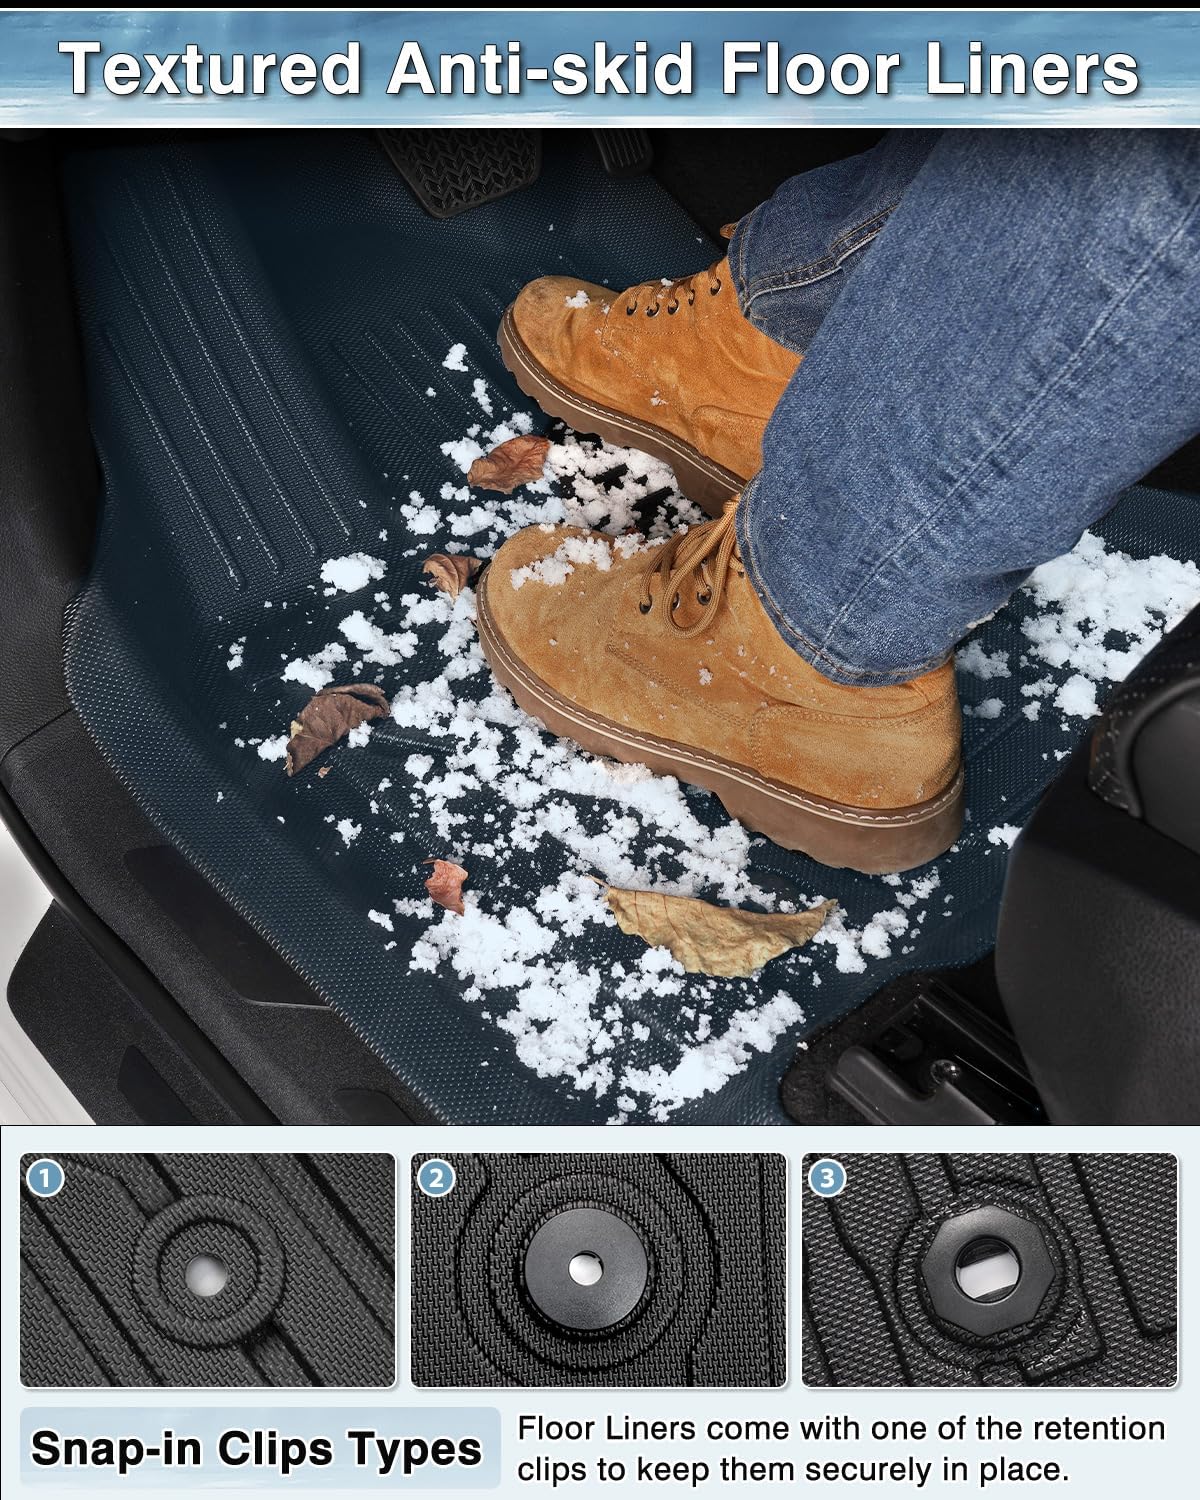 Mixsuper Liner Floor Mats Compatible with 2019-2024 BMW X5, All Weather Floor Liners for X5 Accessories Durable 1st and 2nd Row Set Black